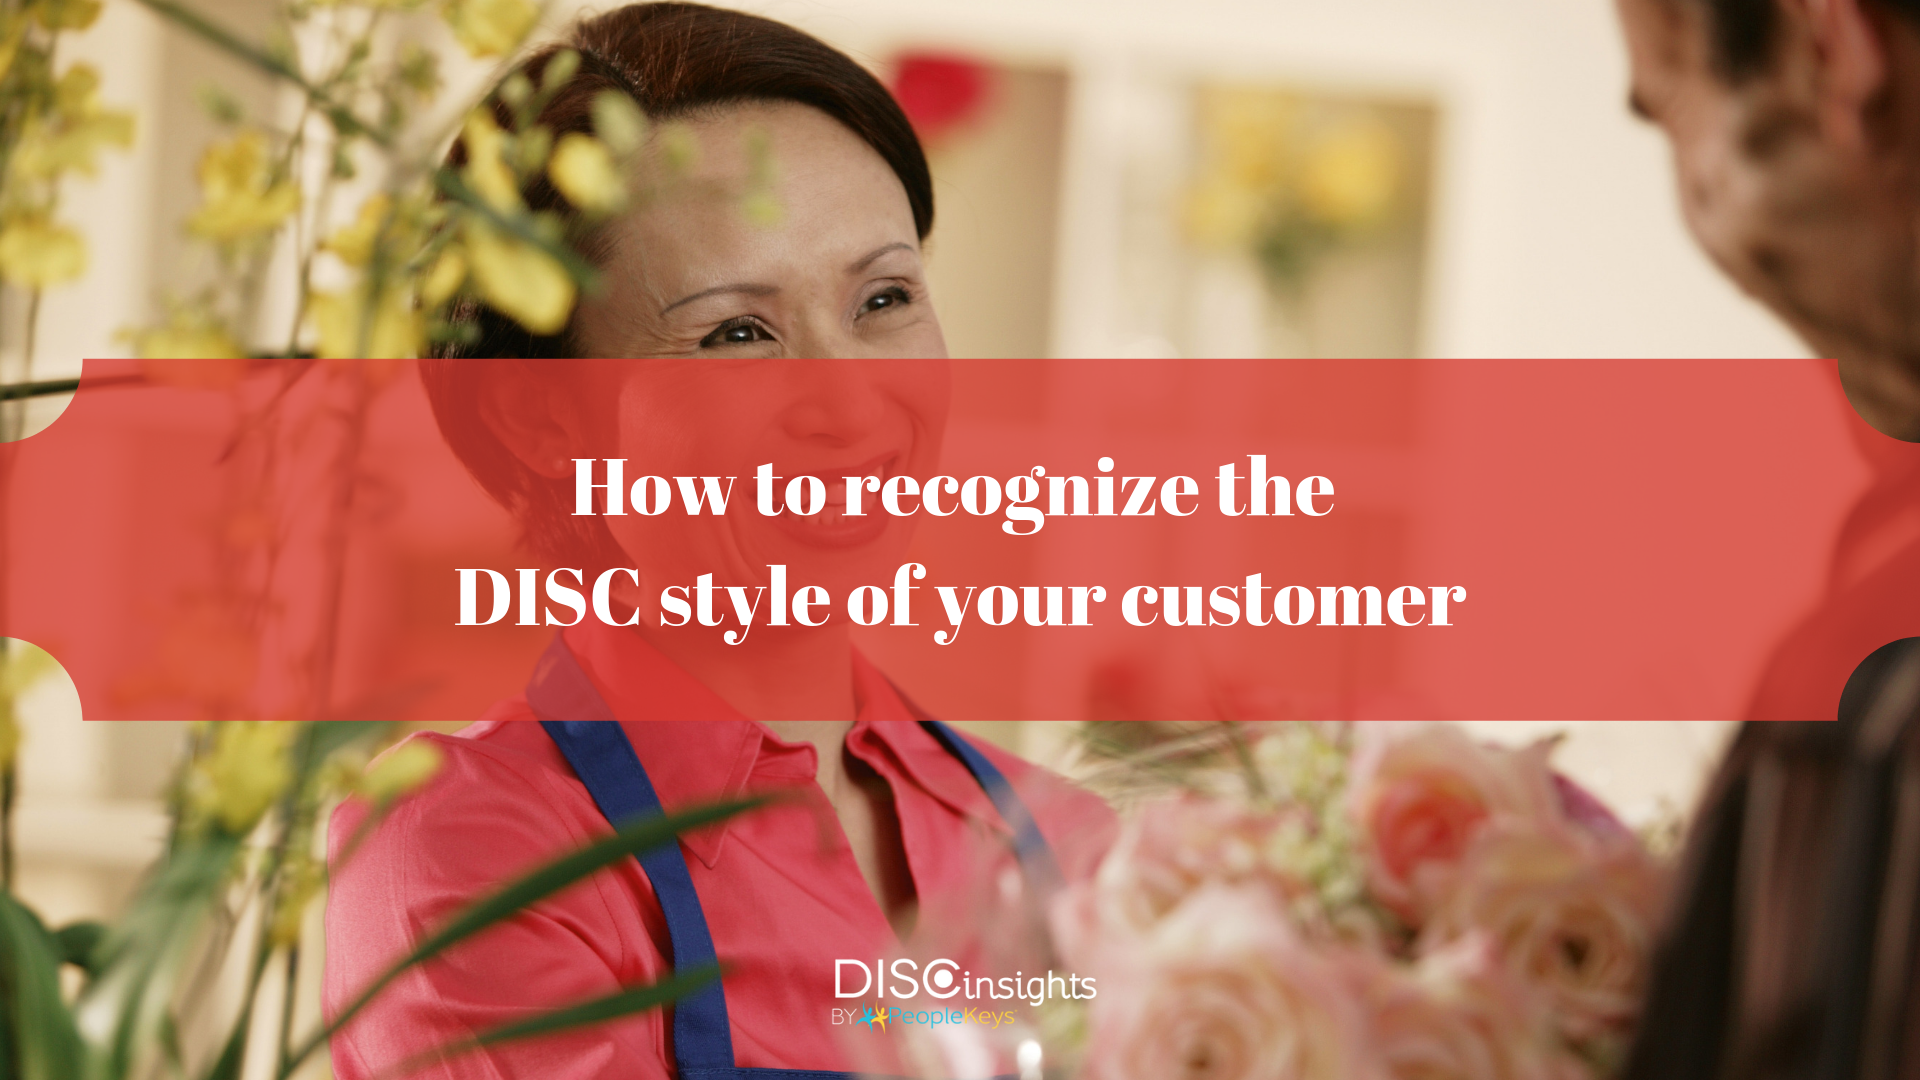 How to recognize the DISC style of your customer